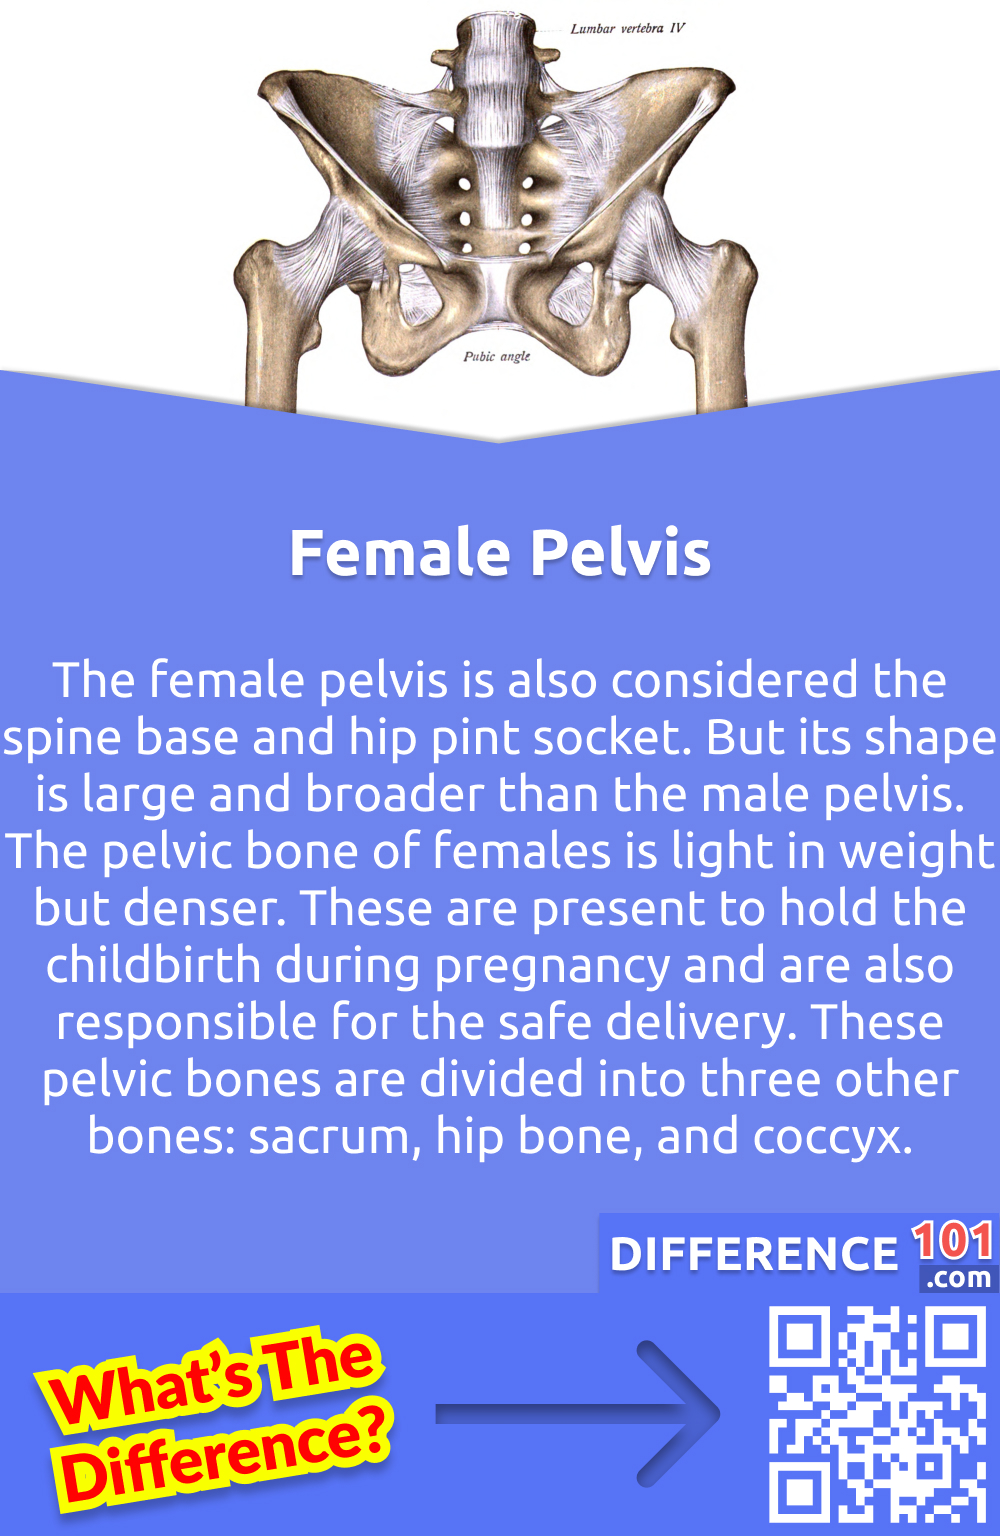 What Is the Female Pelvis? The female pelvis is also considered the spine base and hip pint socket. But its shape is large and broader than the male pelvis. The pelvic bone of females is light in weight but denser. These are present to hold the childbirth during pregnancy and are also responsible for the safe delivery. These pelvic bones are divided into three other bones: sacrum, hip bone, and coccyx. The sacrum bone is wider and shorter. The pelvic inlet has an oval shape. The pubic arch is wider and is greater than 90°.